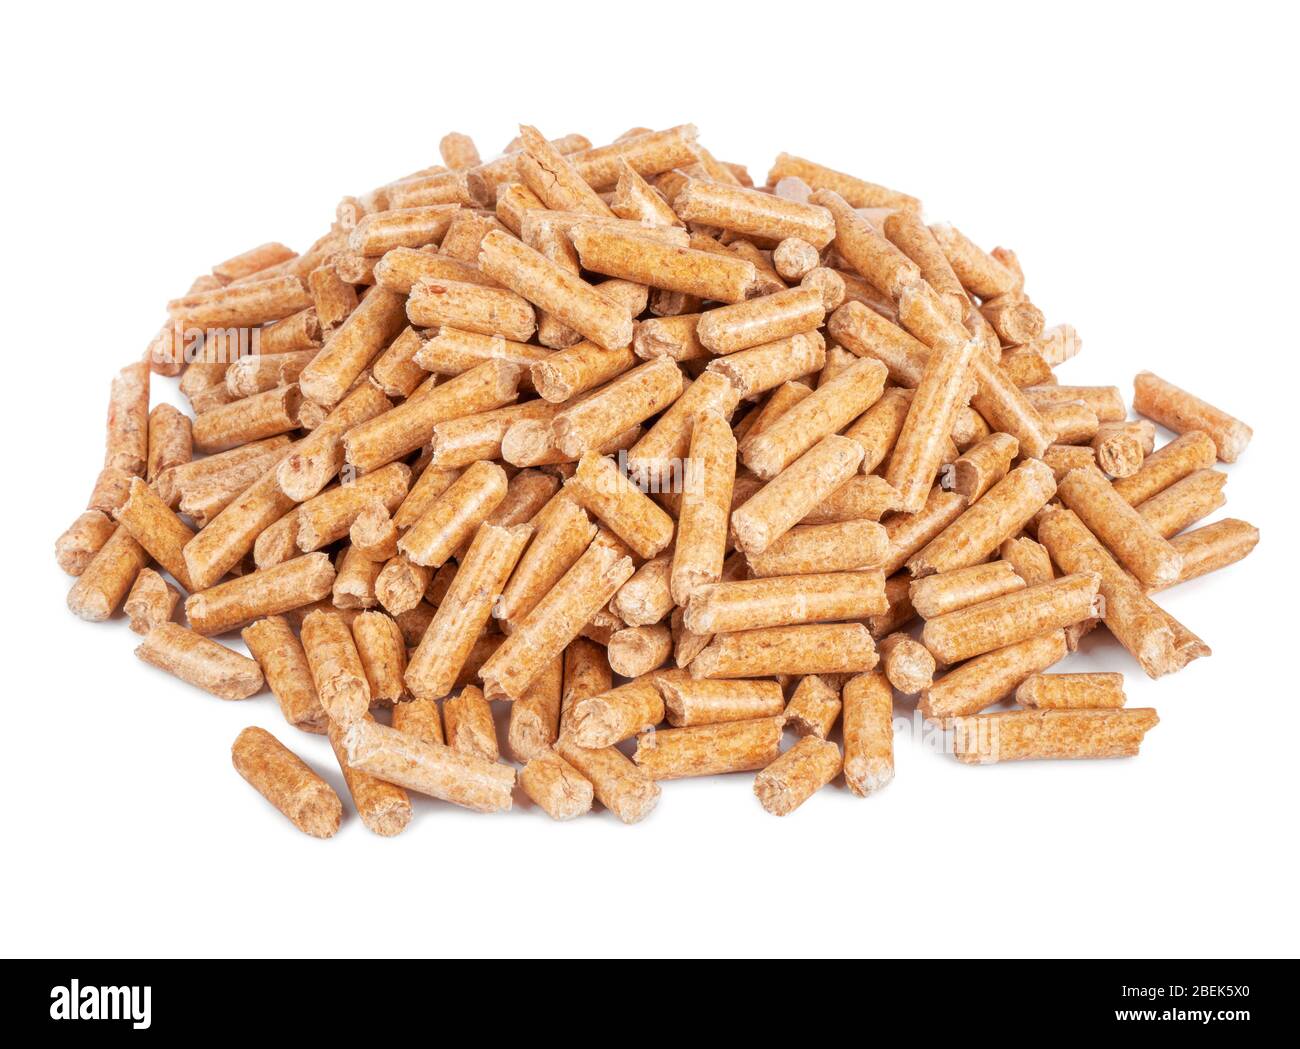 Pile of compressed wood pellets on white background. Biofuel Stock Photo